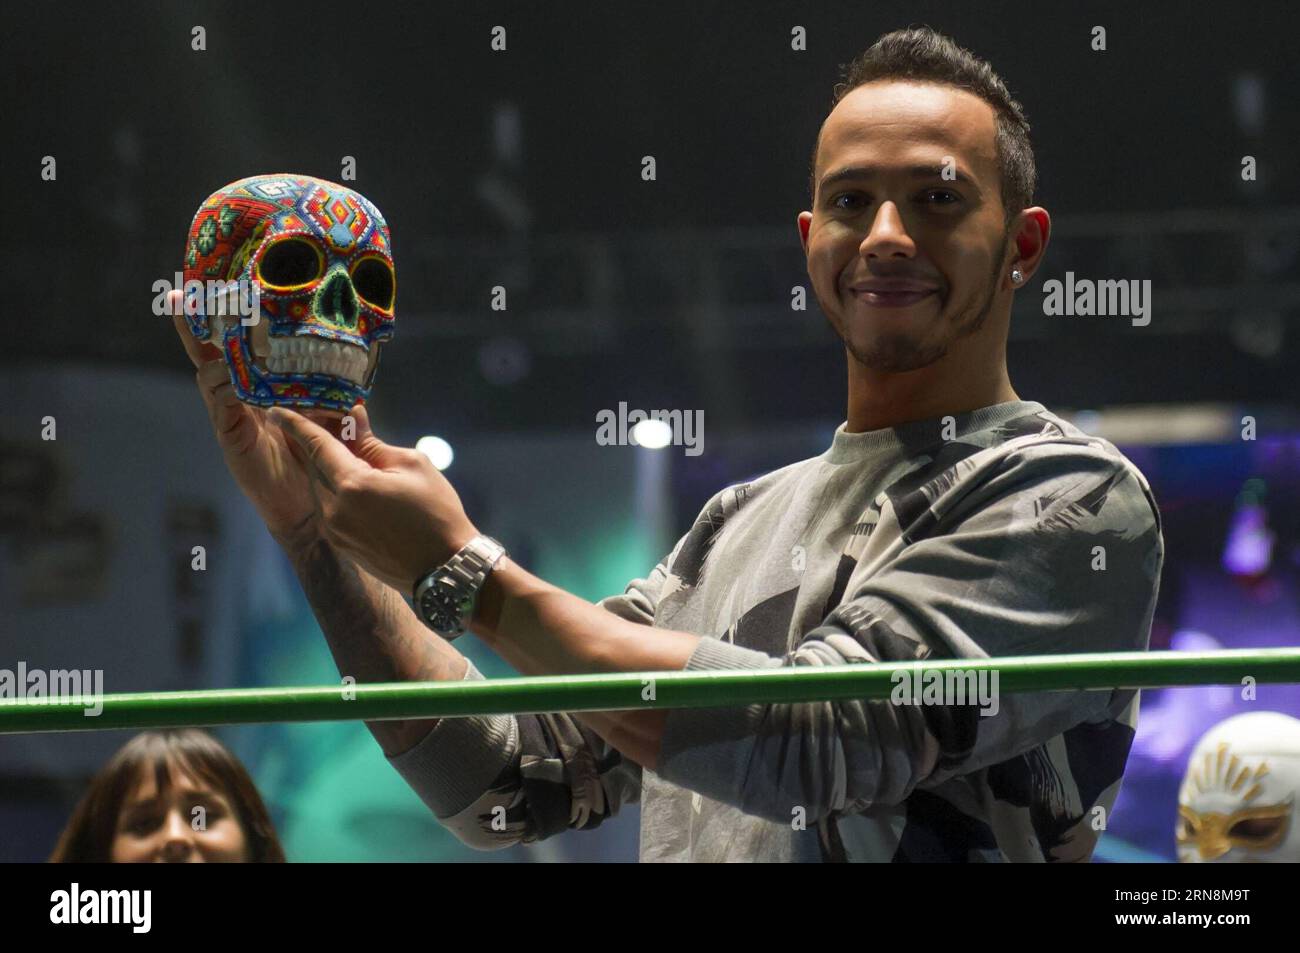 (151029) -- MEXICO CITY,  - British driver Lewis Hamilton of Mercedes team, poses during his visit to Arena Mexico, prior to the F1 Mexican Grand Prix, in Mexico City, capital of Mexico, on Oct. 28, 2015. According to local press, Lewis Hamilton visited on Wednesday the Arena Mexico, where he watched a wrestling exhibition and played a match of table football at the ring with Mexican soccer player Oribe Peralta. The F1 Mexican Grand Prix will be held from Oct. 30 to Nov. 1, in Mexico City. ) (SP)MEXICO-MEXICO CITY-AUTOMOBILE-F1 OSCARxRAMIREZ PUBLICATIONxNOTxINxCHN   Mexico City British Driver Stock Photo